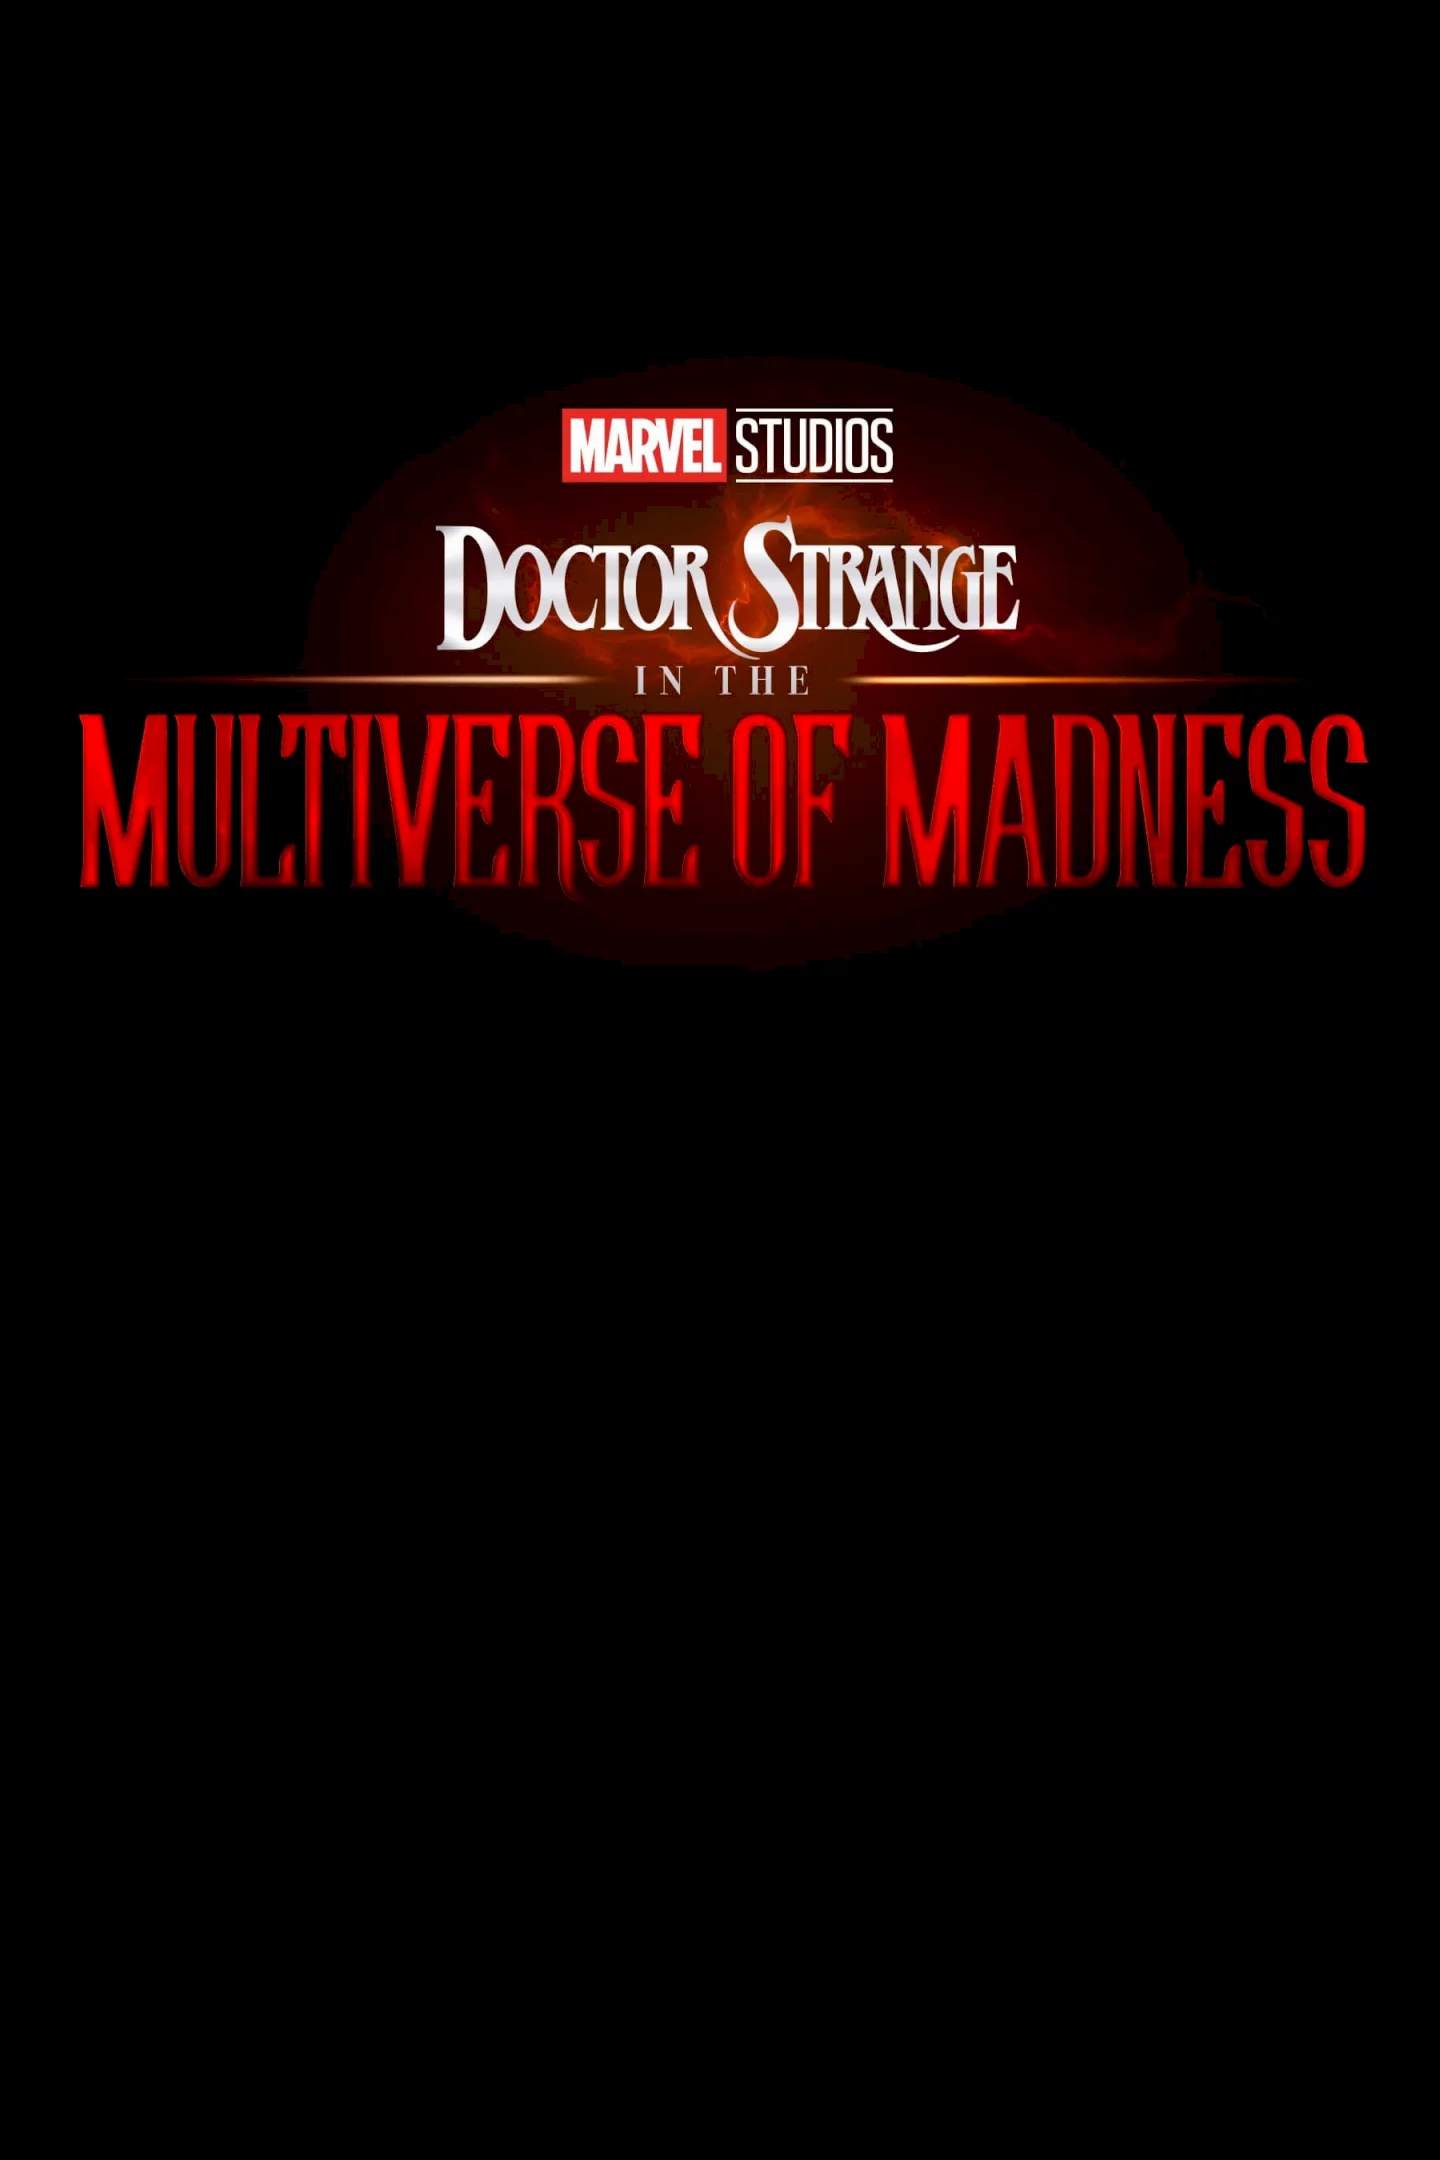 Photo 2 du film : Doctor Strange in the Multiverse of Madness